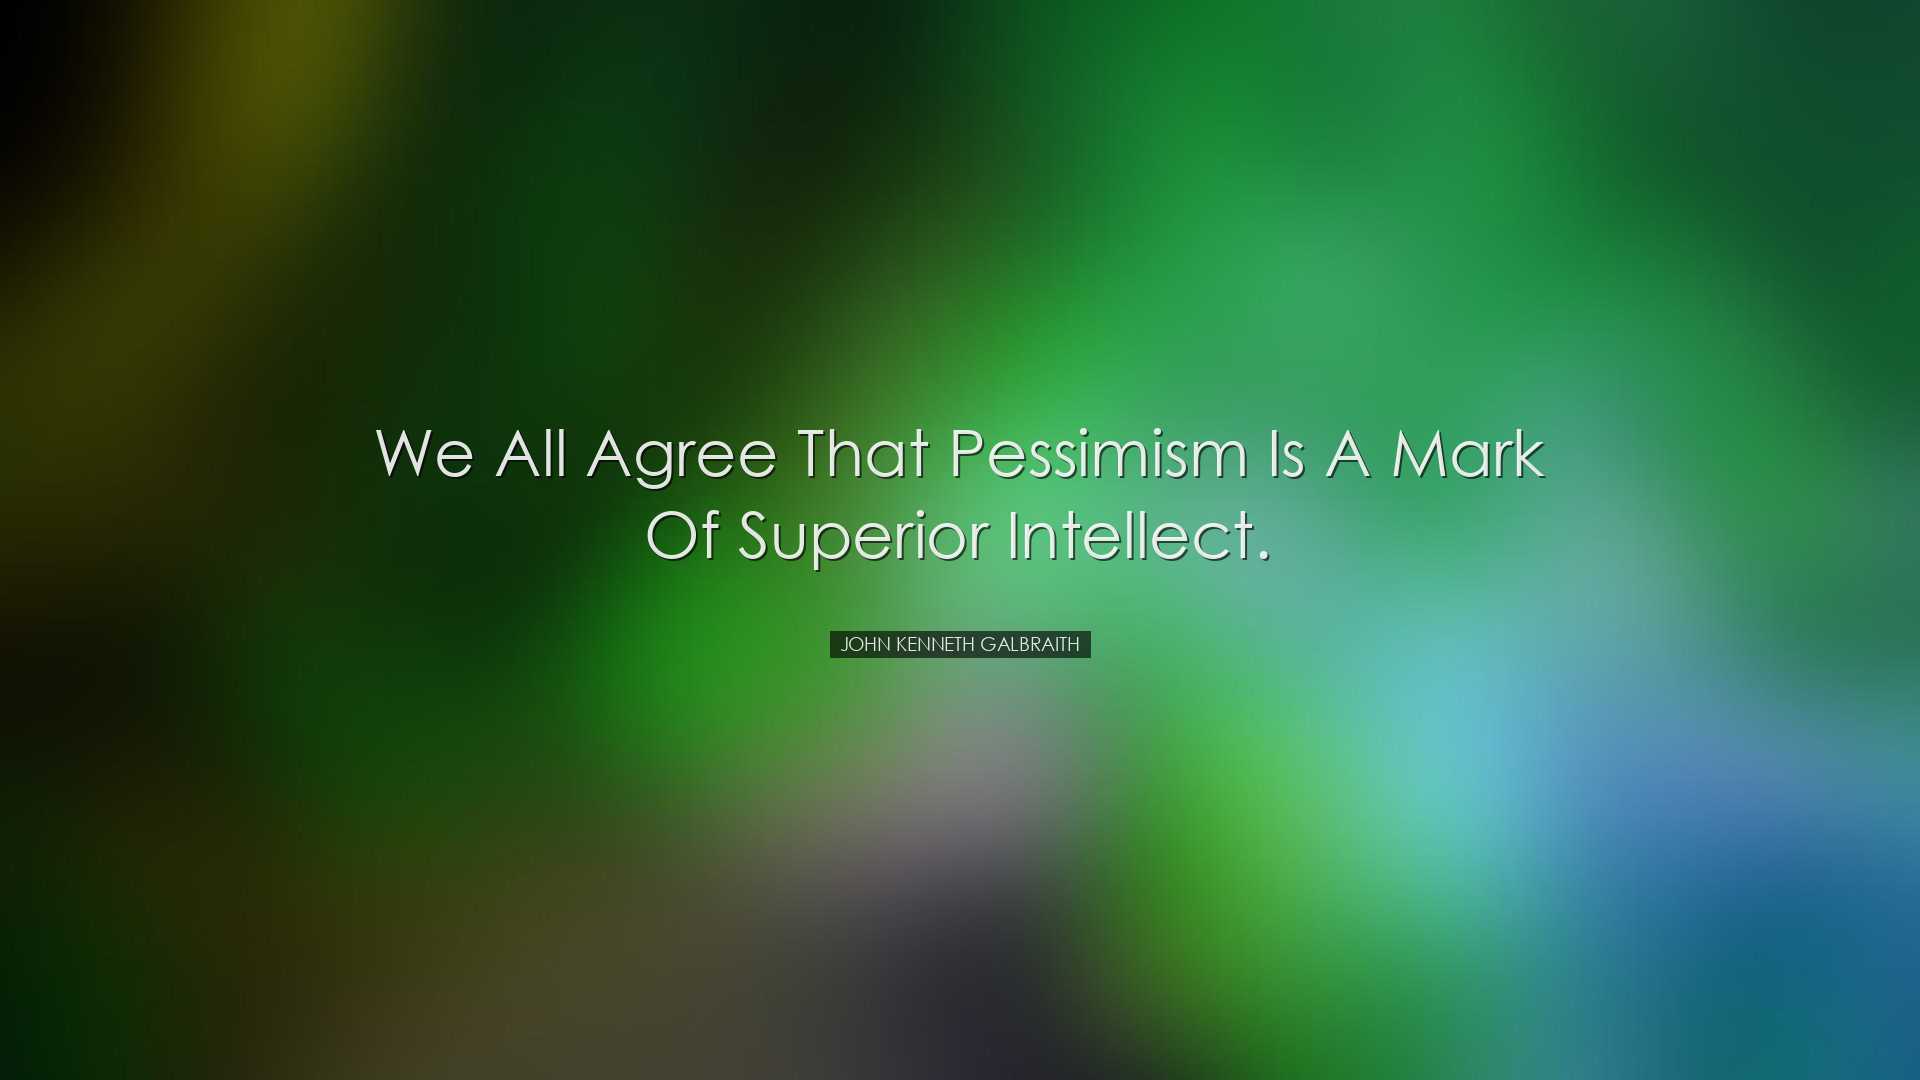 We all agree that pessimism is a mark of superior intellect. - Joh